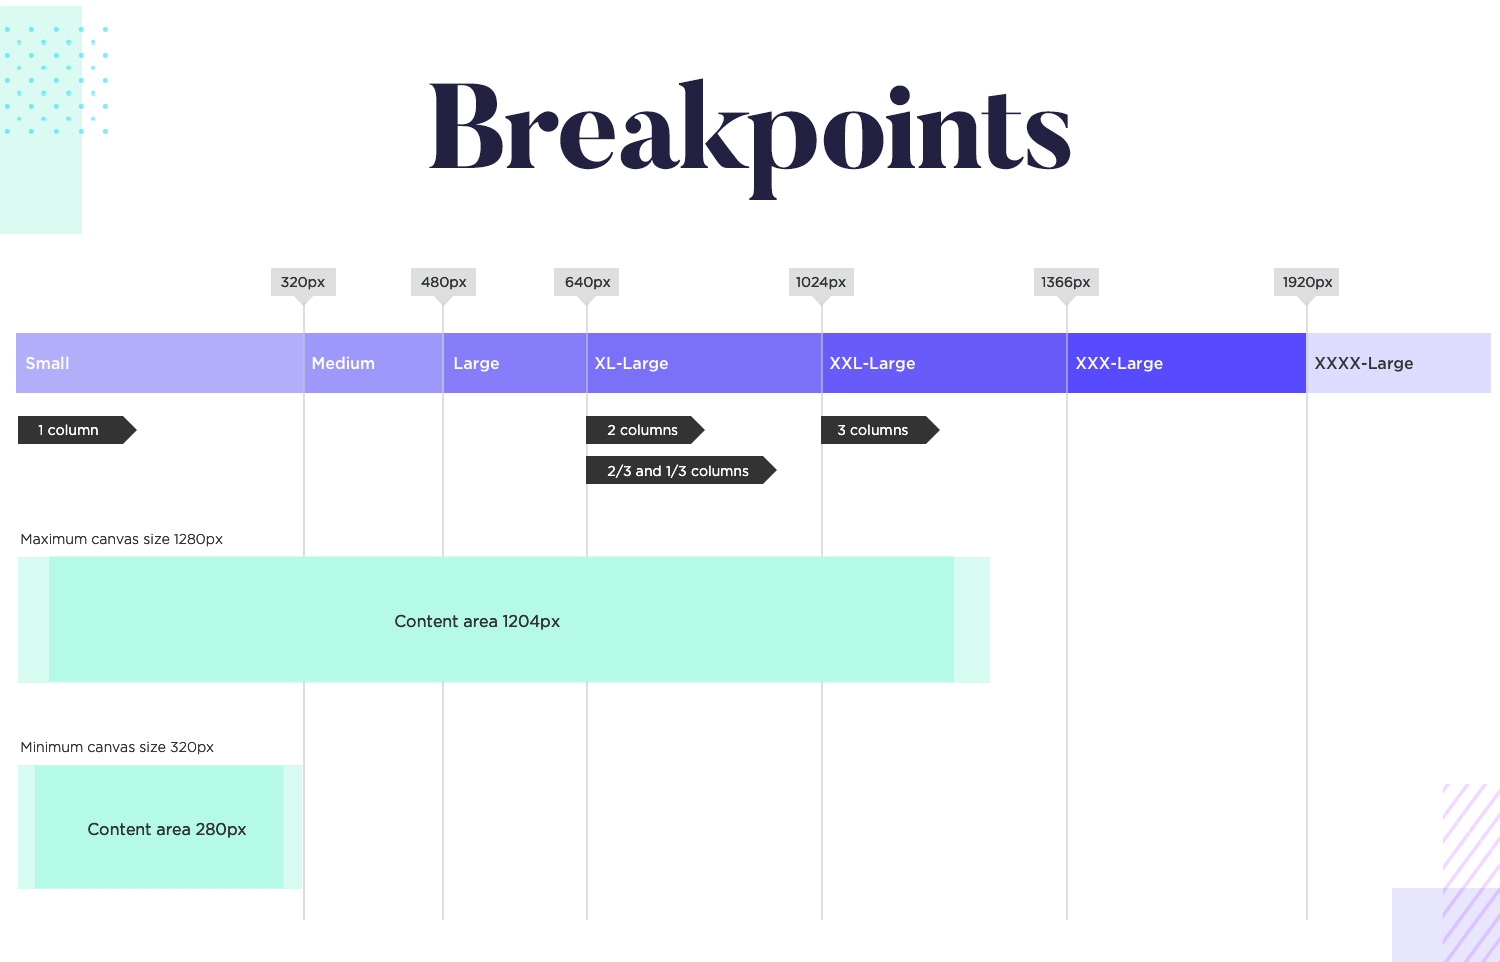 wordpress themes edit layout by responsive breakpoints